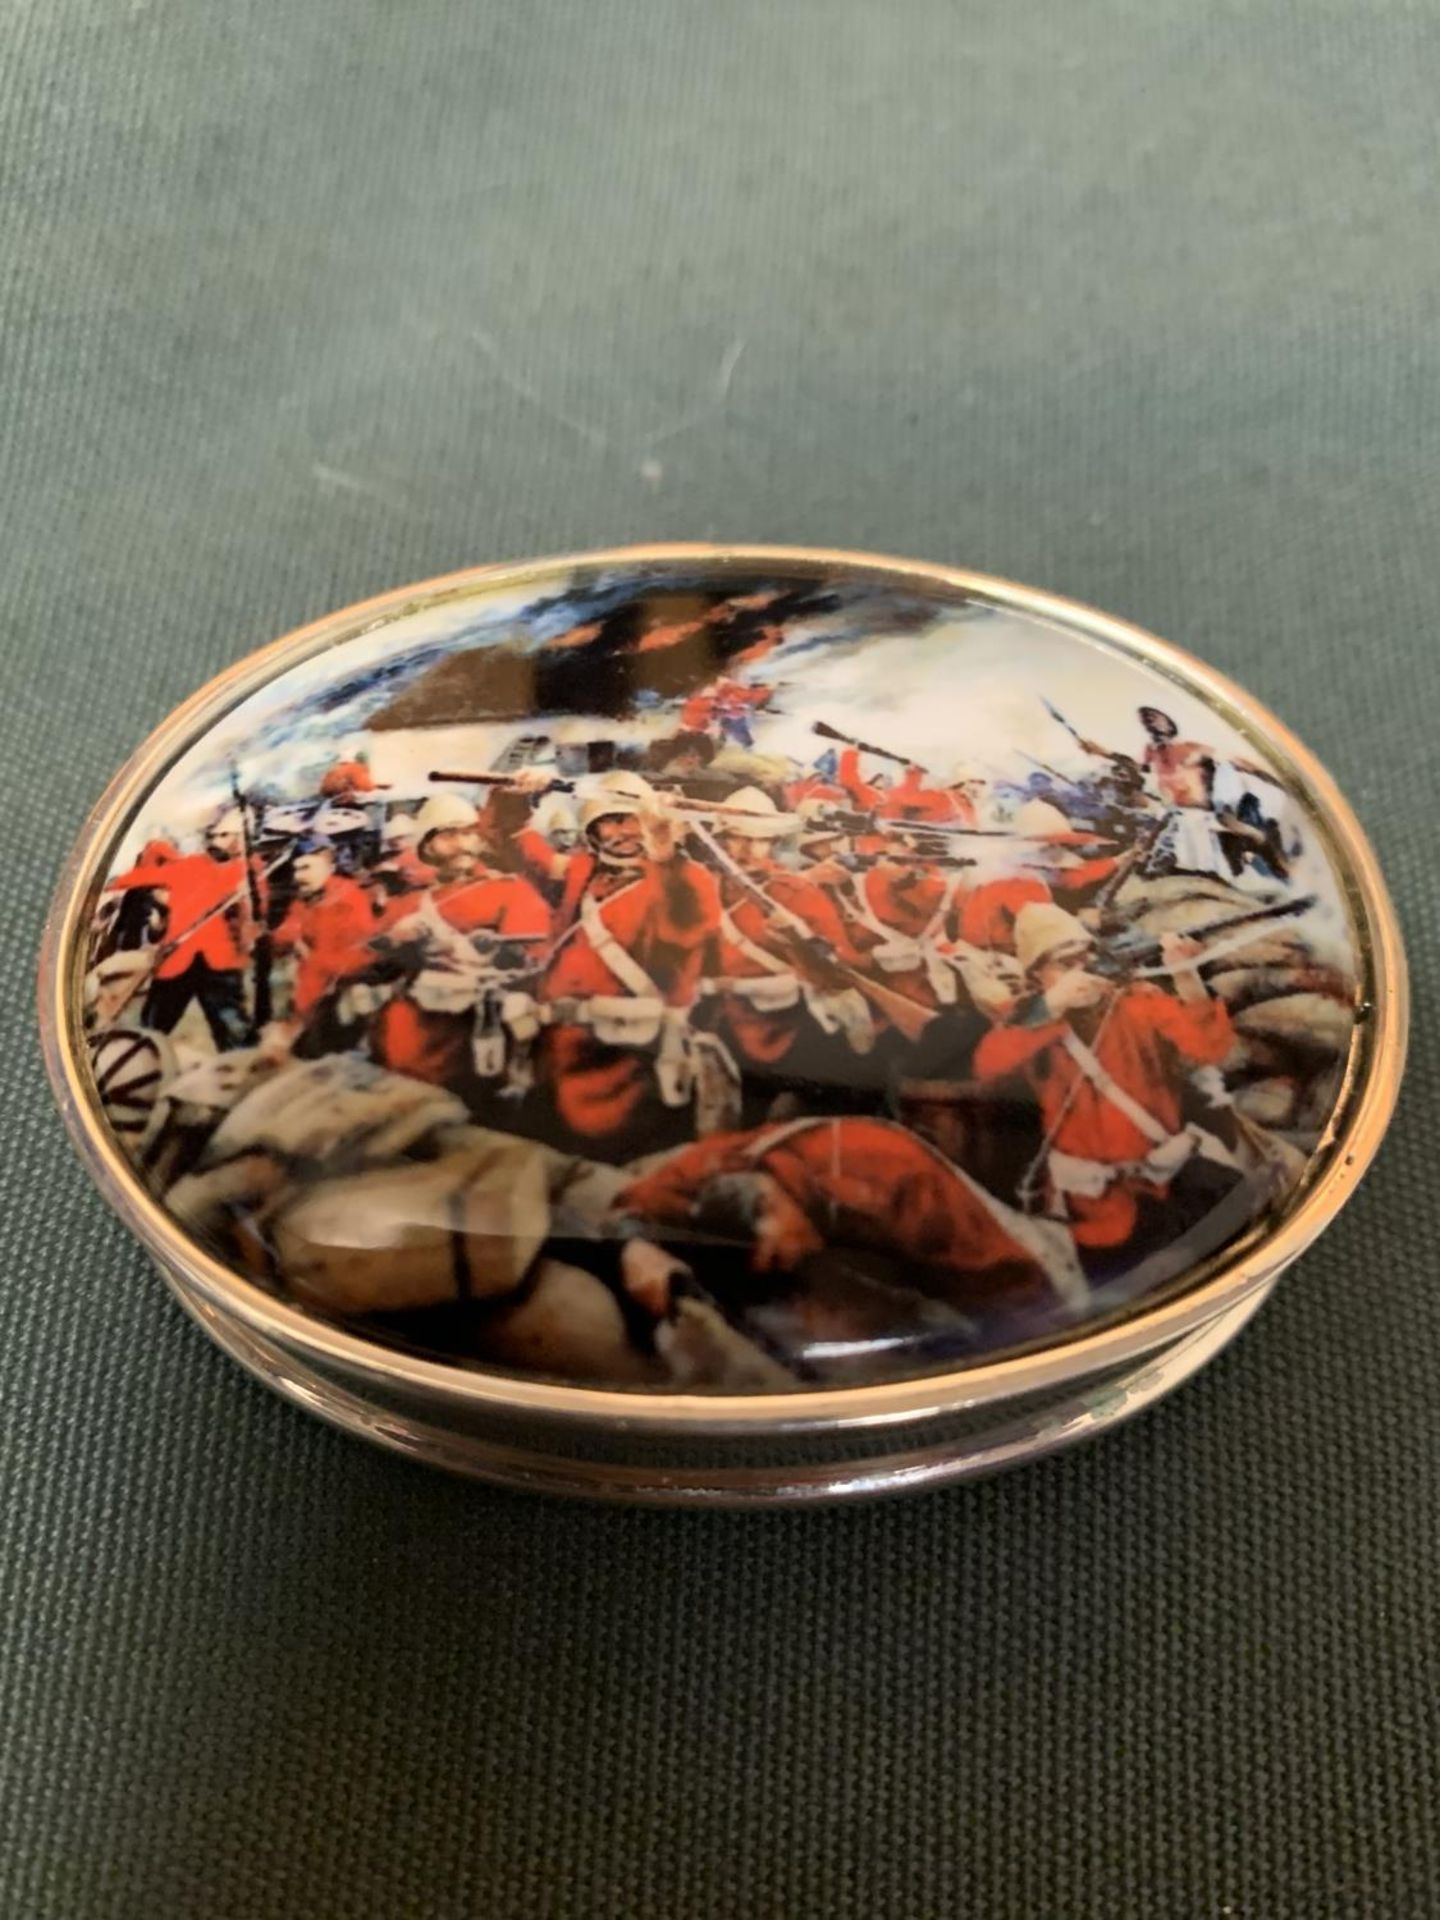 A MARKED 925 SILVER LARGE SNUFF BOX WITH AN ENAMEL TOP DEPICTING RORKES DRIFT BATTLE 1879